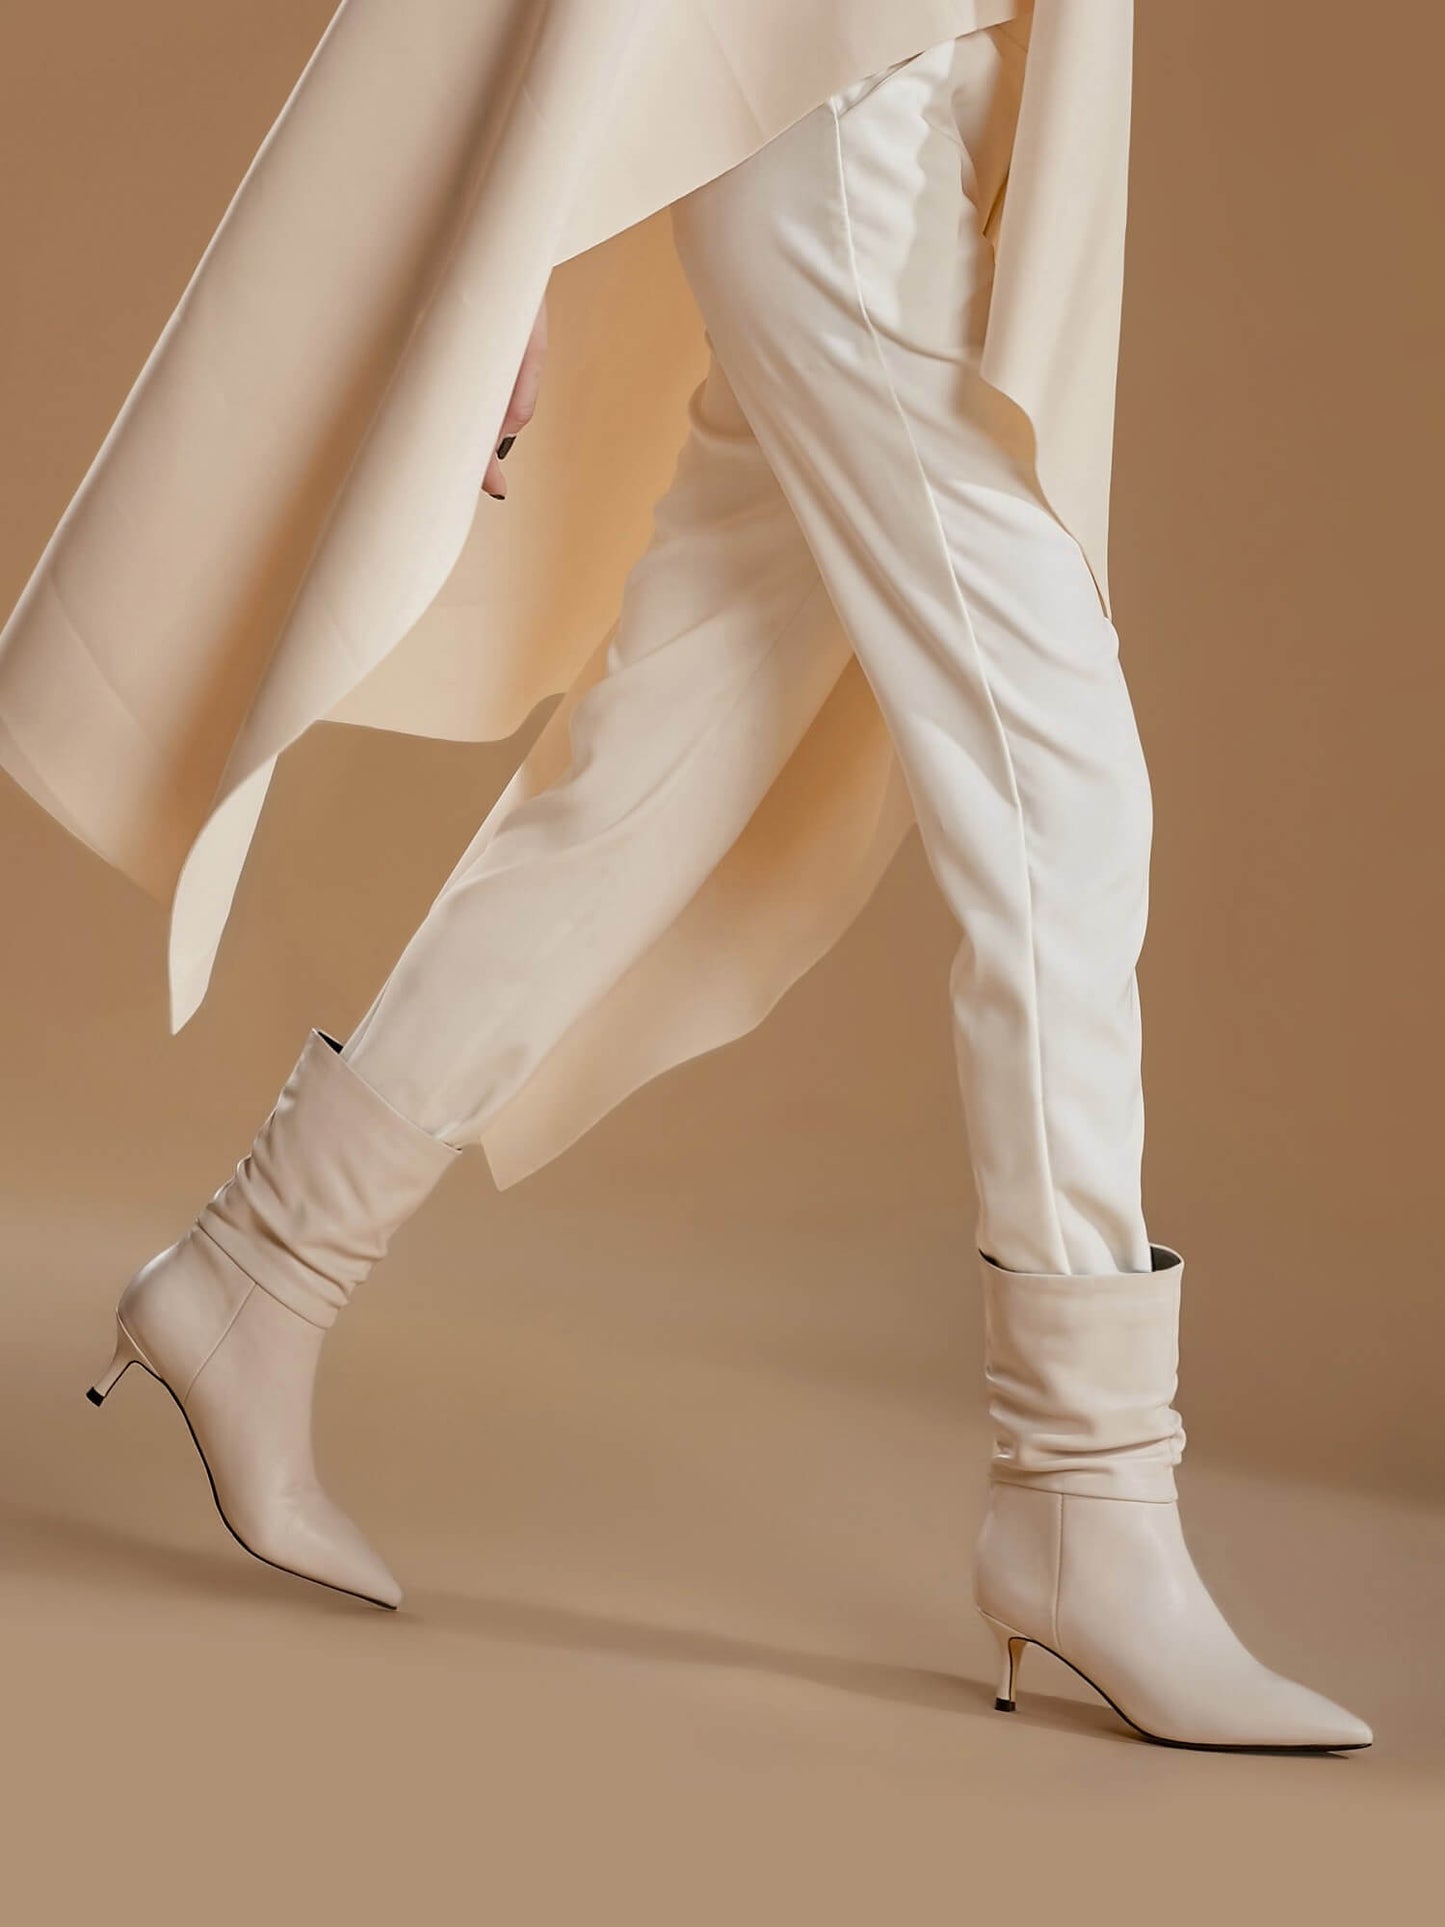 ROLISA-Milo-Slouchy-Ruched-Leather-Kitten-Heels-Mid-Calf-Boots-White-Model